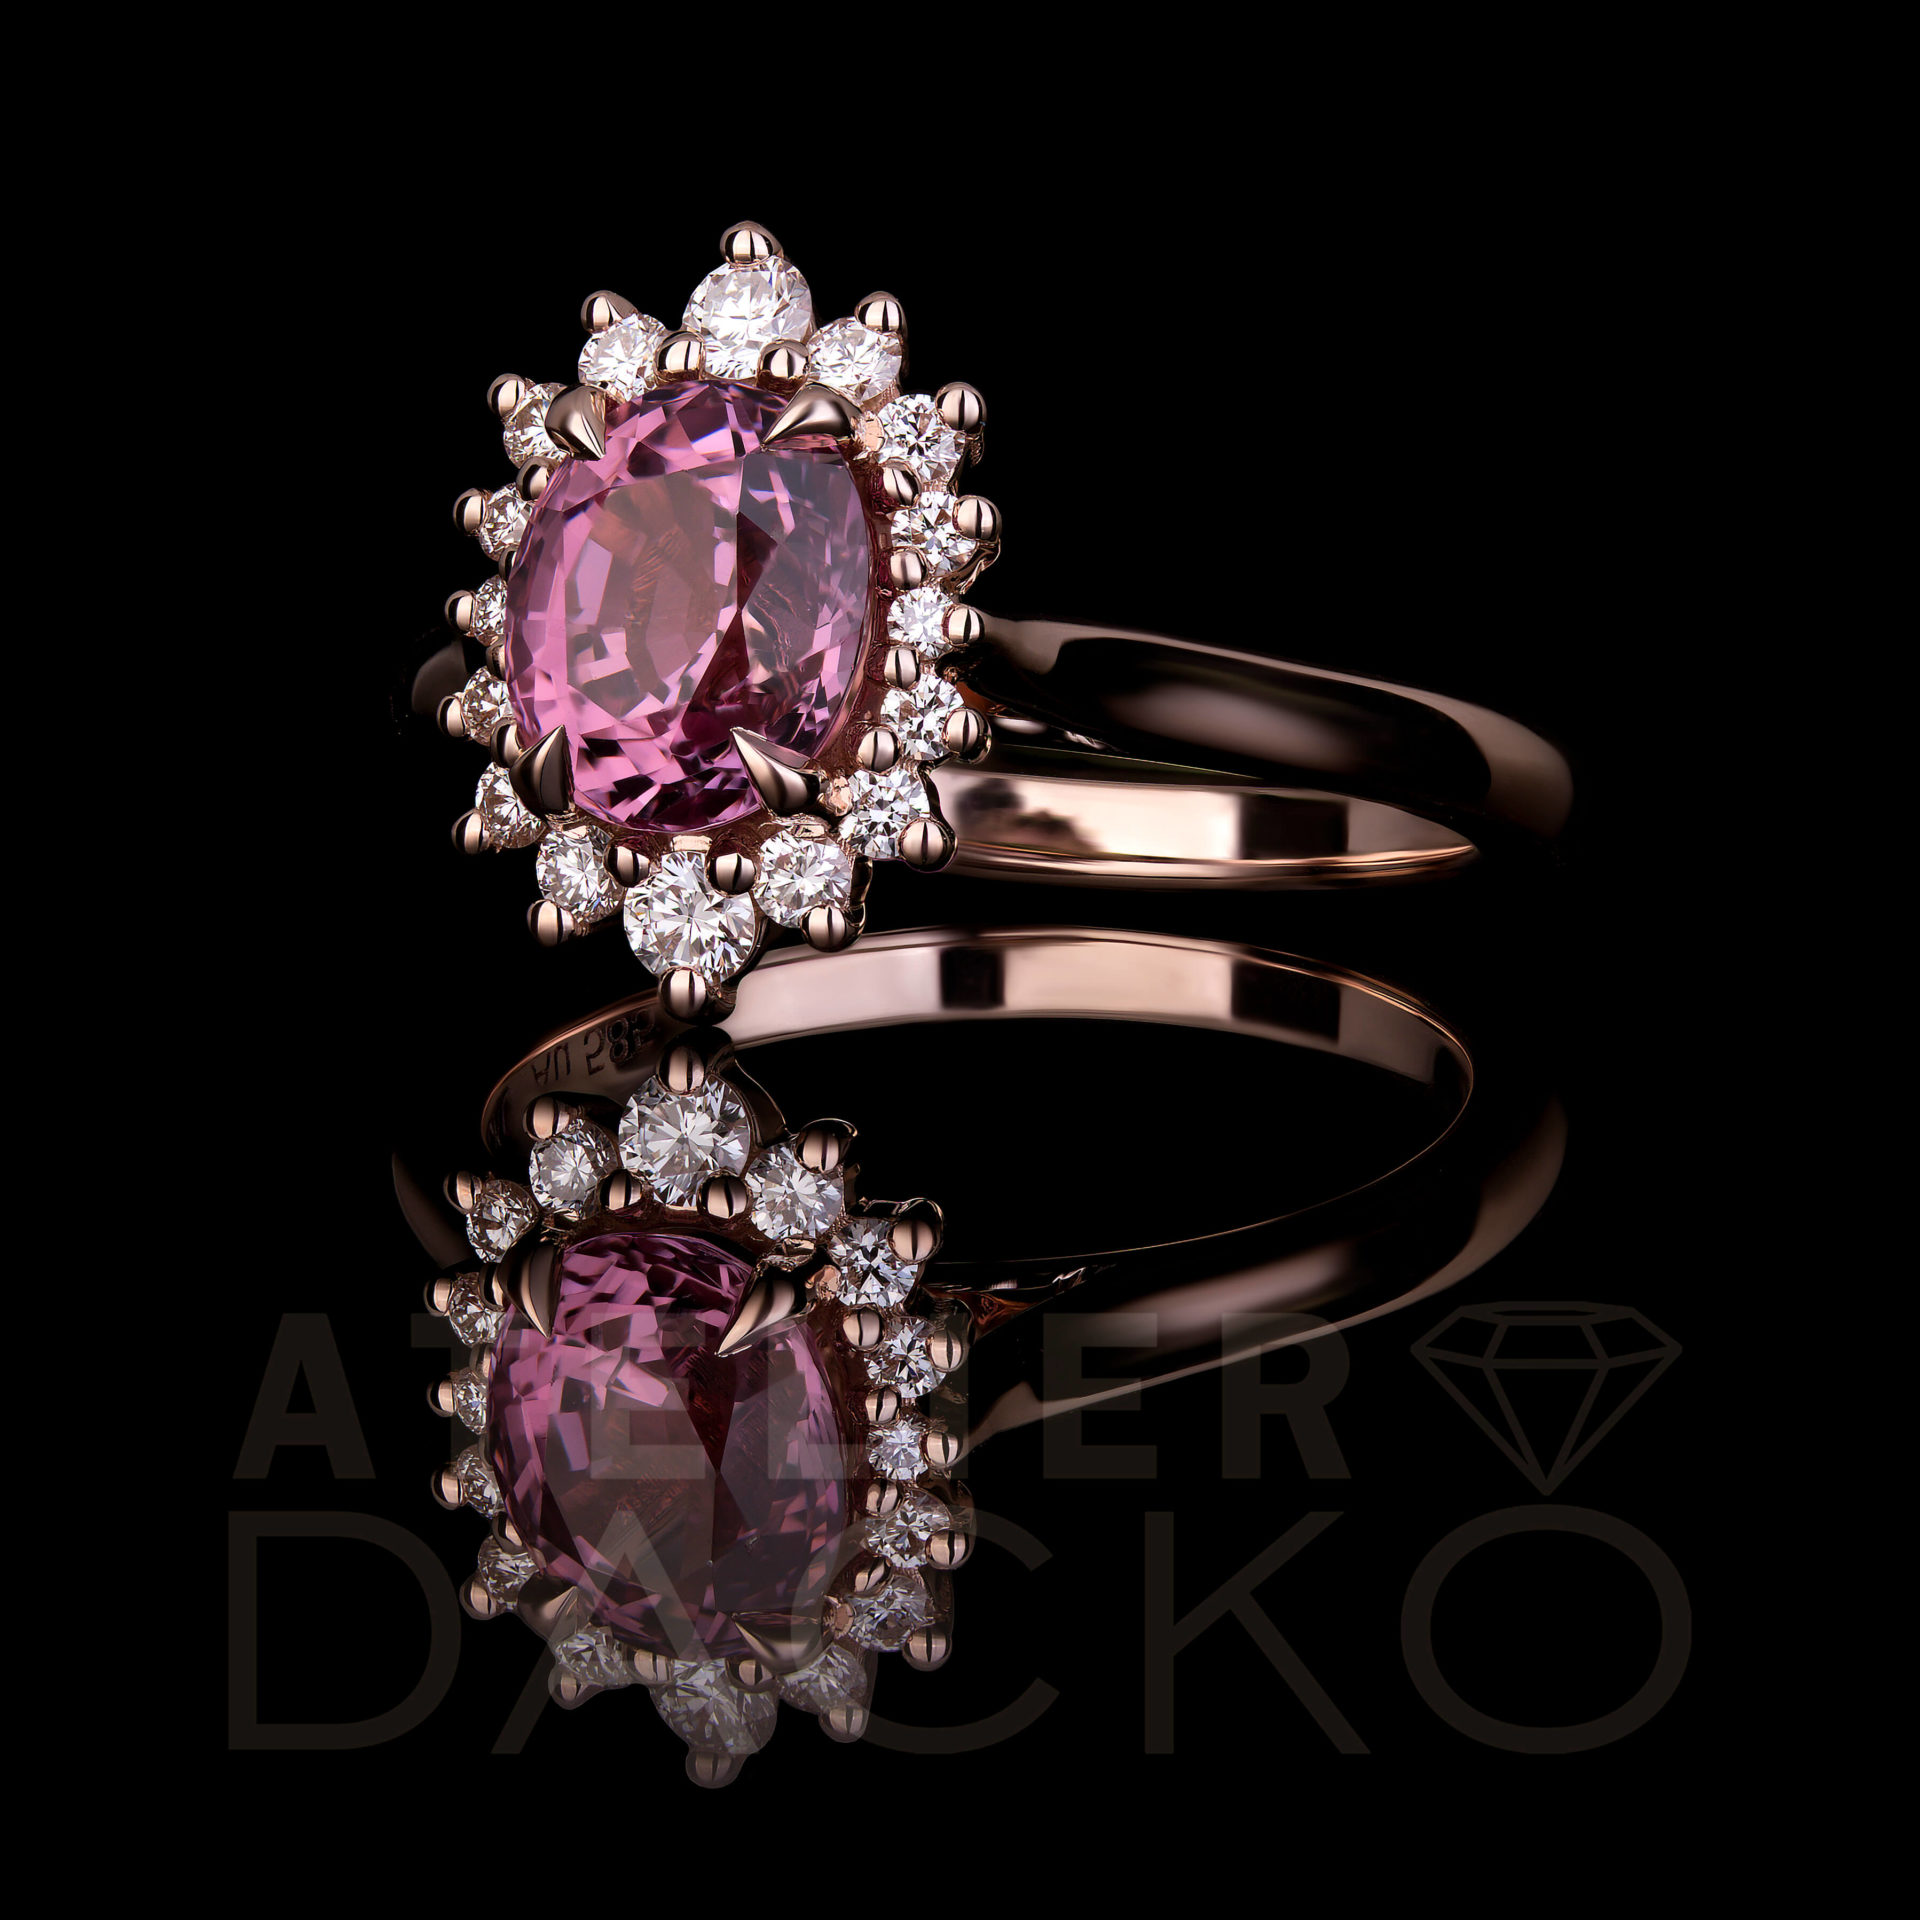 AD055 - 1.43 CT Pink Oval Spinel with Floral Halo Ring - 2